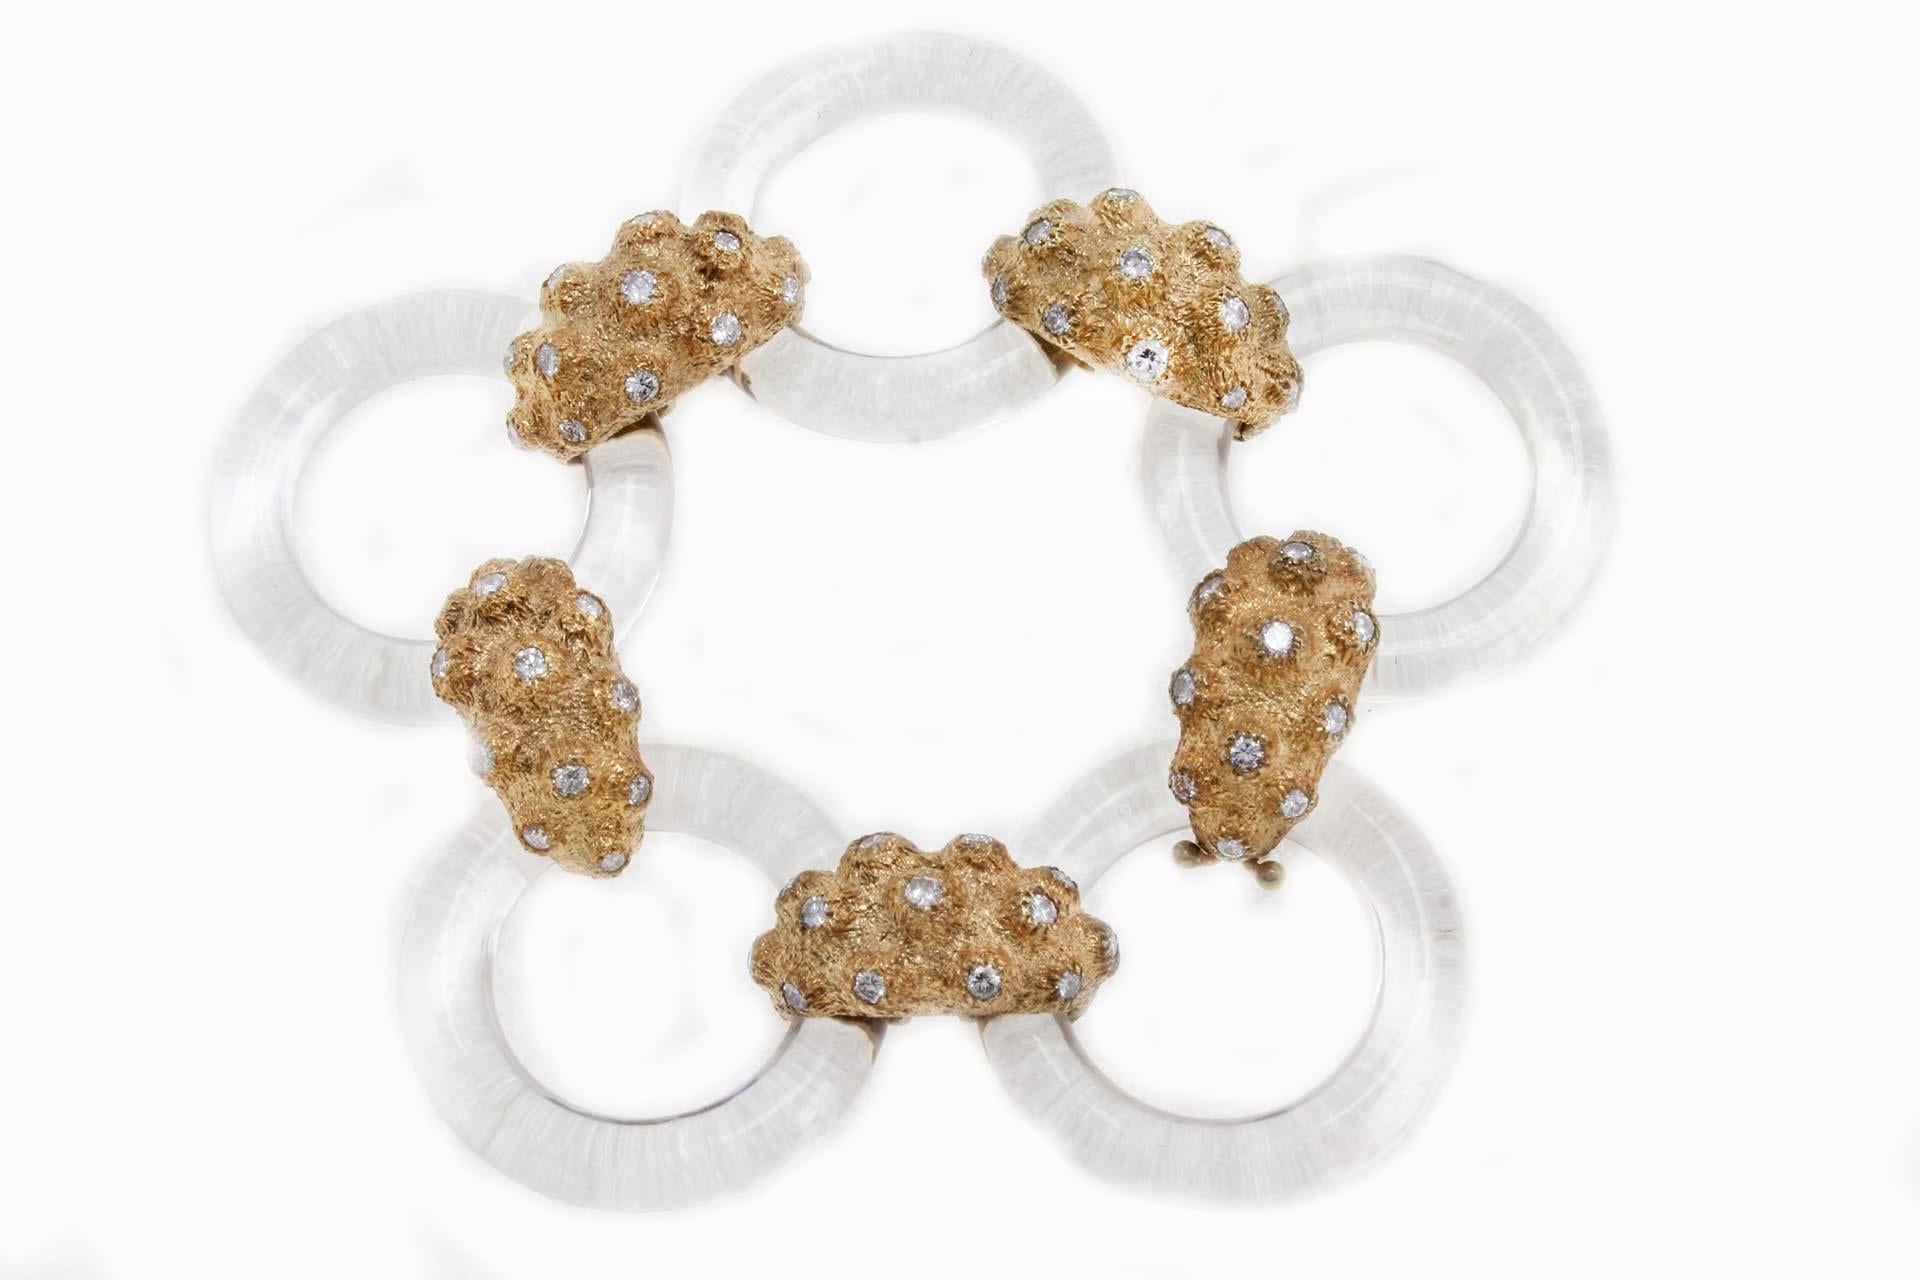 SHIPPING POLICY: 
No additional costs will be added to this order. 
Shipping costs will be totally covered by the seller (customs duties included).

Parure in 18 kt yellow gold composed of a bracelet and earrings, both mounted with diamonds and rock